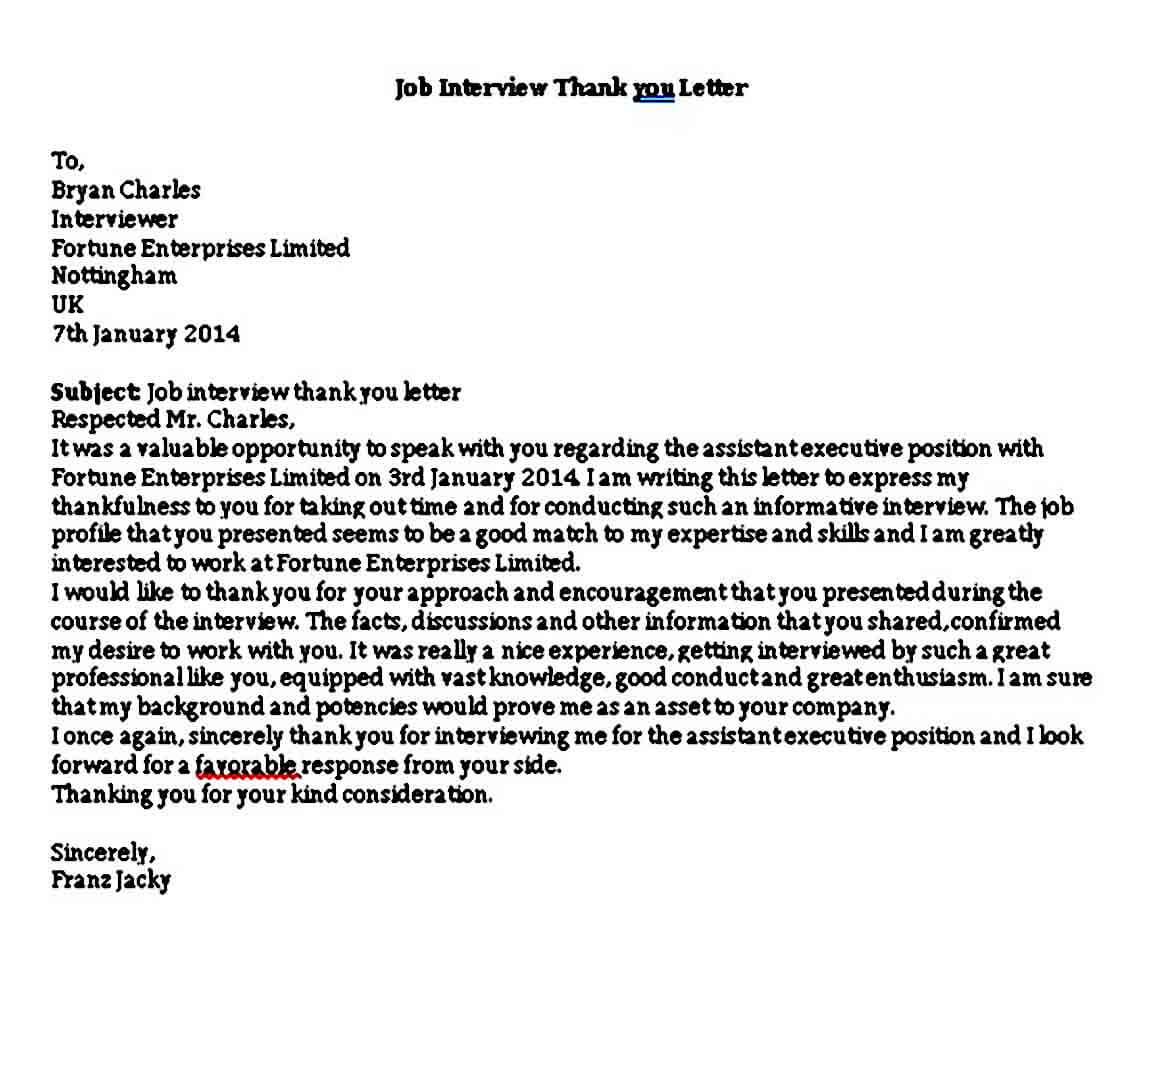 Job Interview Thank you Letter. 